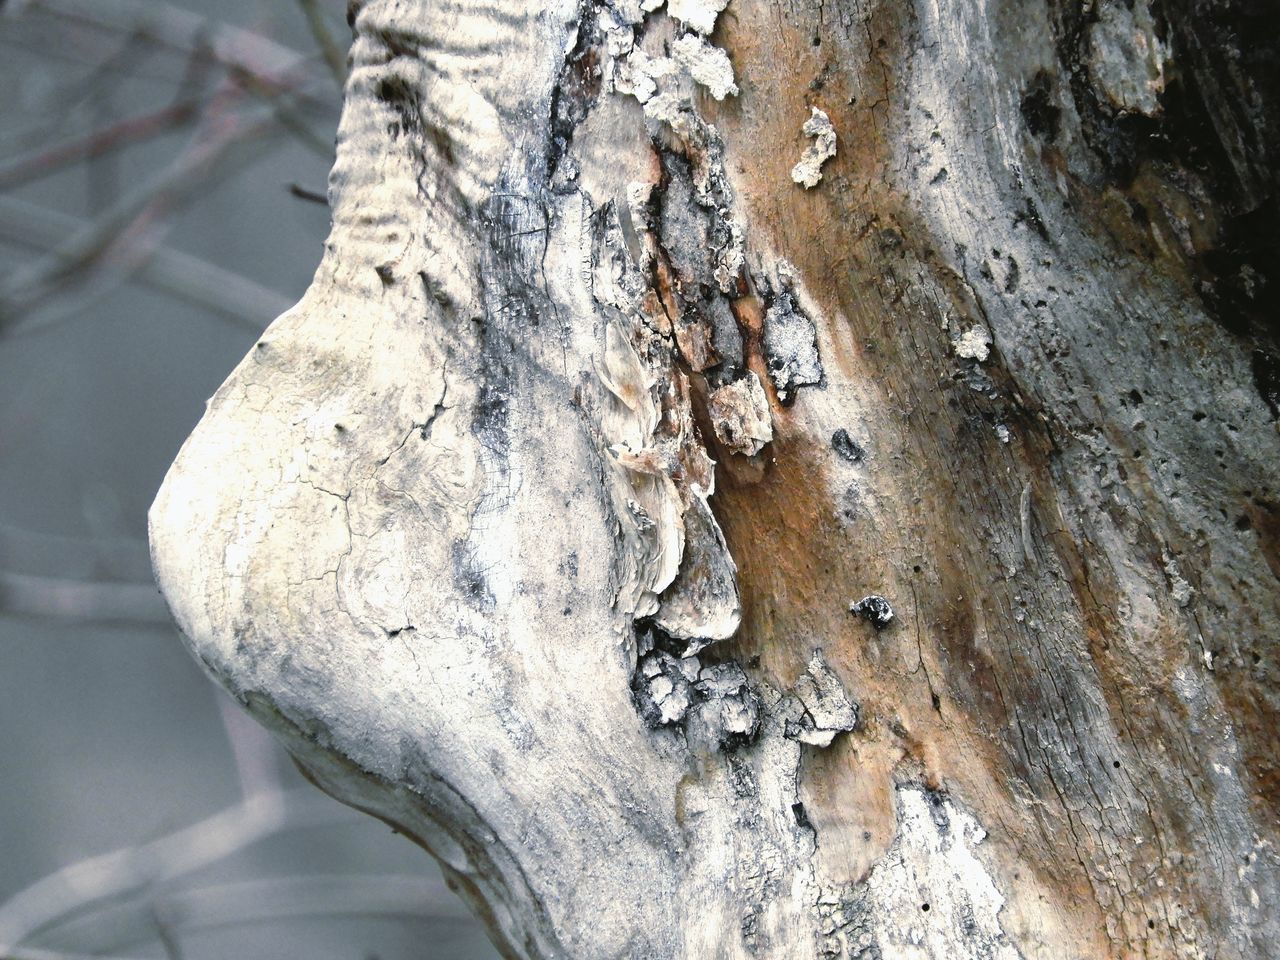 CLOSE-UP OF TREE TRUNK WITH BARK